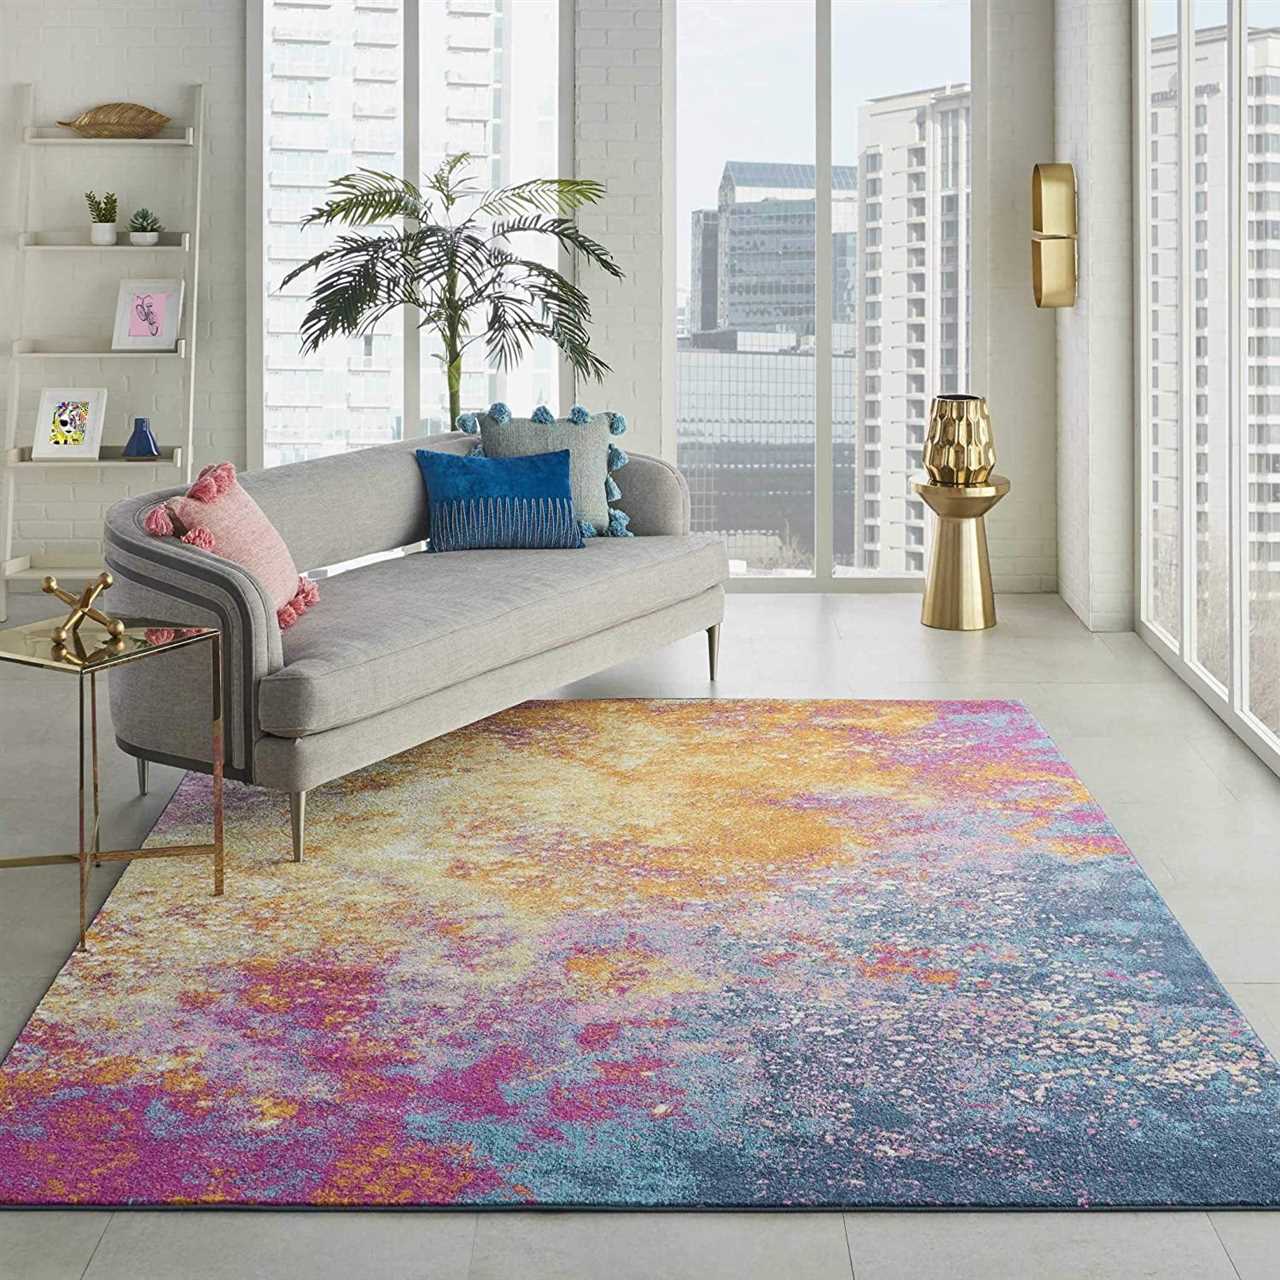 Discover Vibrant and Stylish Colorful Area Rugs - Perfect for Adding a Pop of Color to Any Space